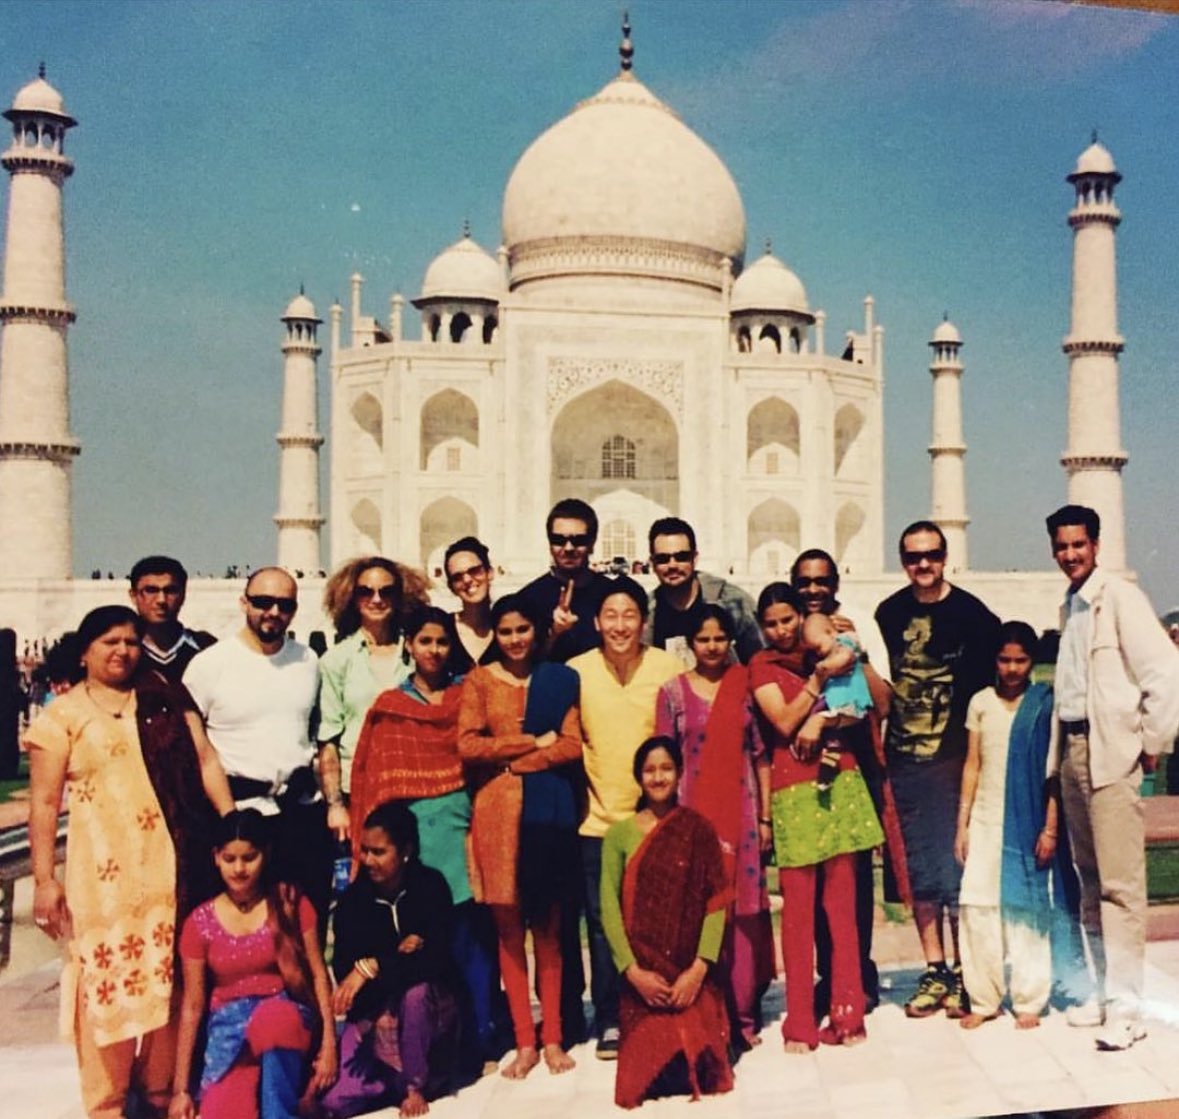 A #ThrowbackThursday to the Taj Mahal! What’s your favorite place you’ve traveled to? 🇮🇳